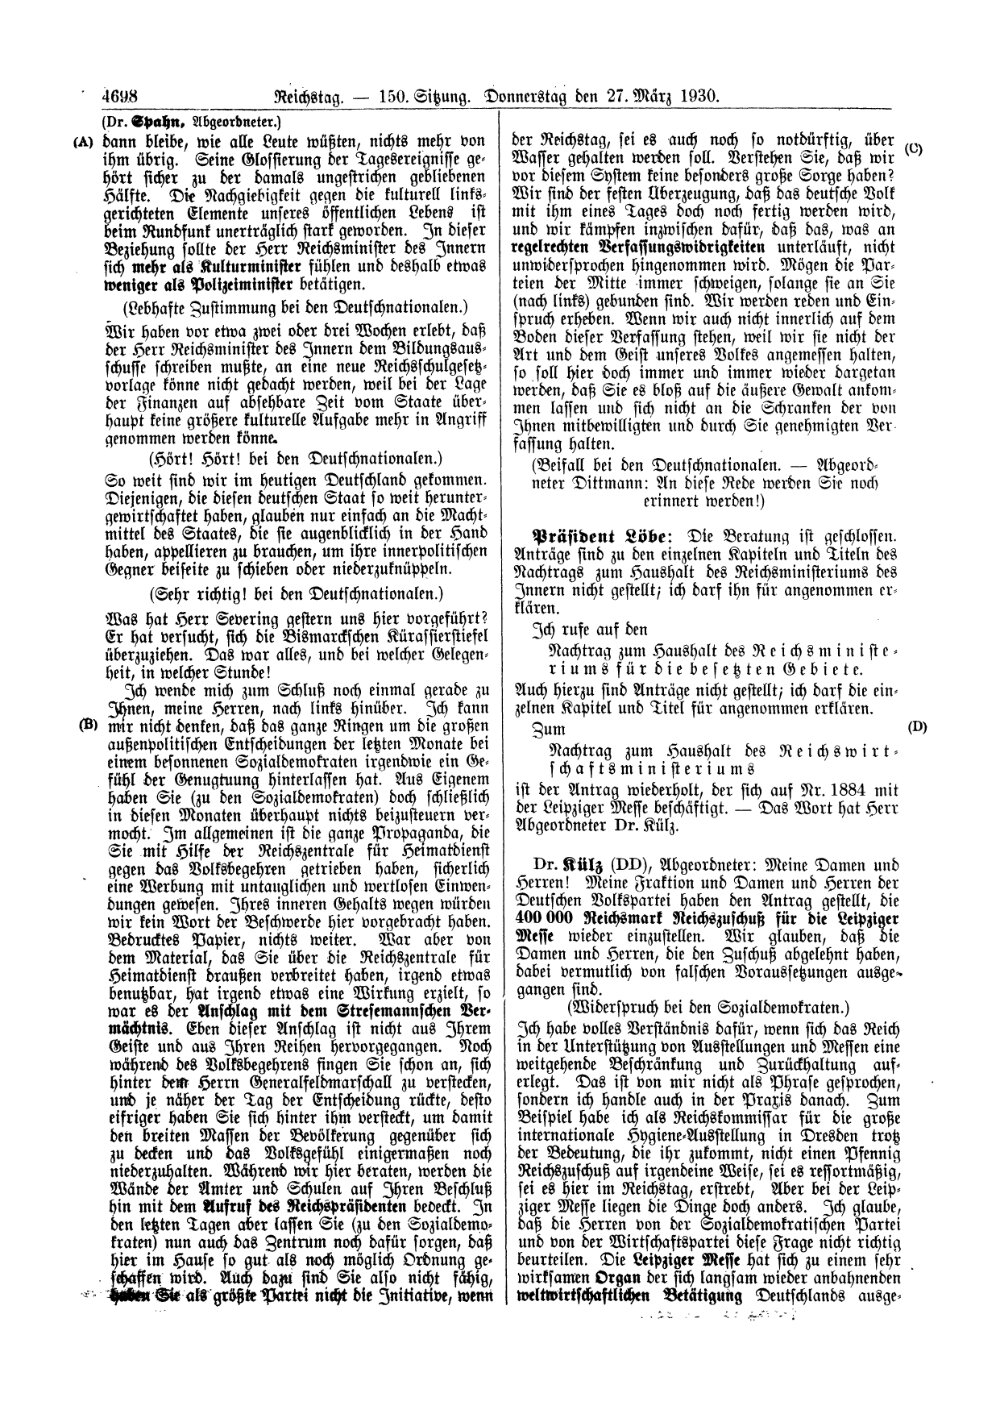 Scan of page 4698